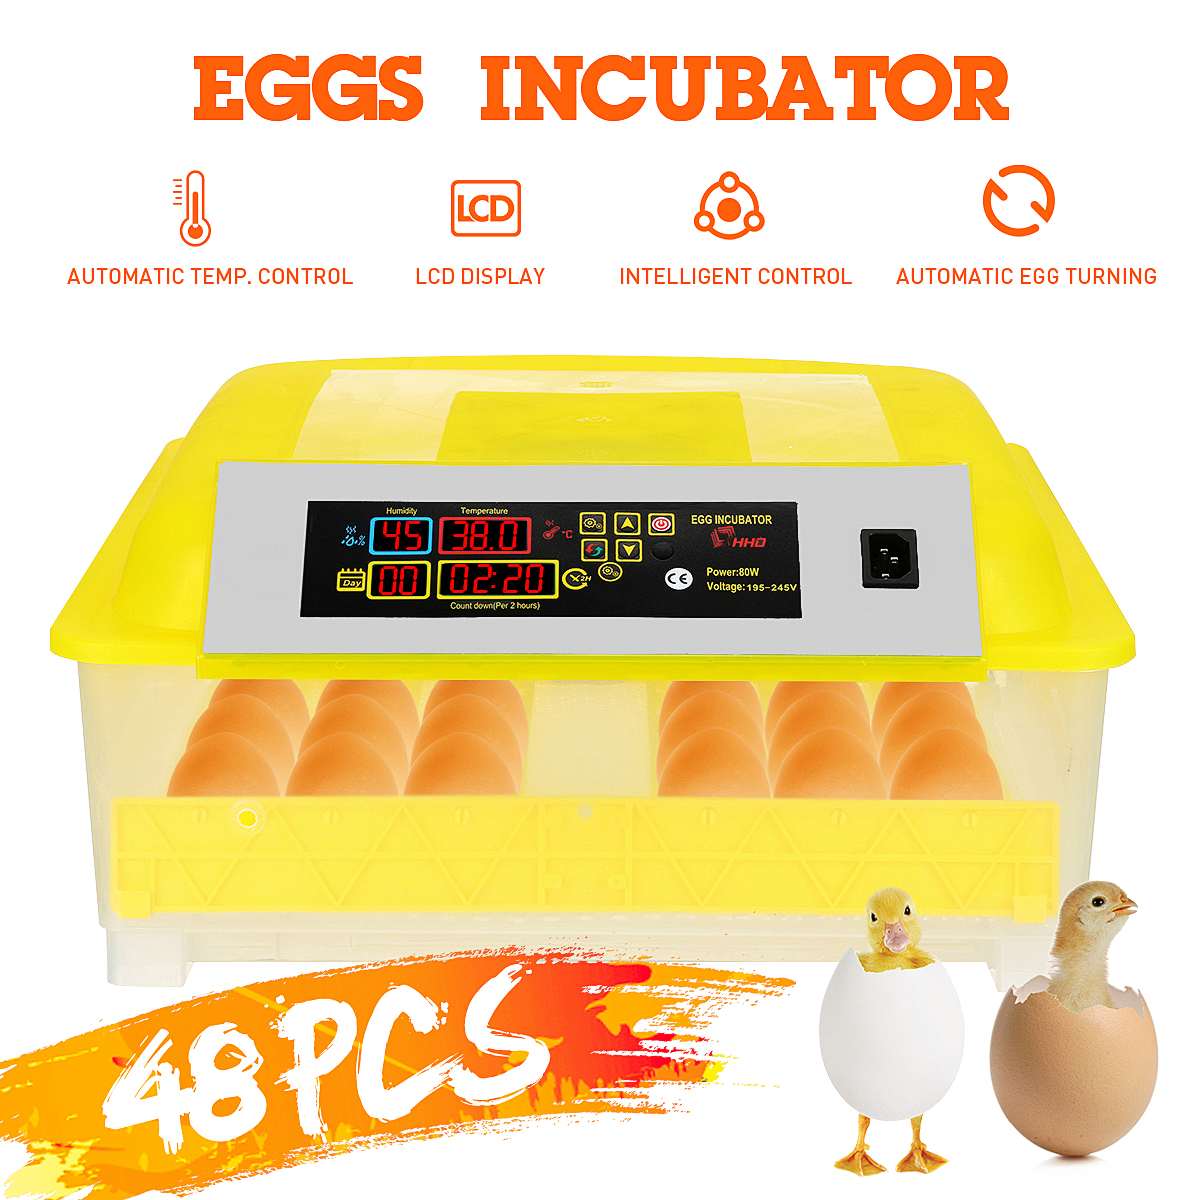 Automatic-48-Egg-Incubator-Home-LED-Candling-Chicken-Duck-Hatcher-Pigeon-Quail-1716325-1